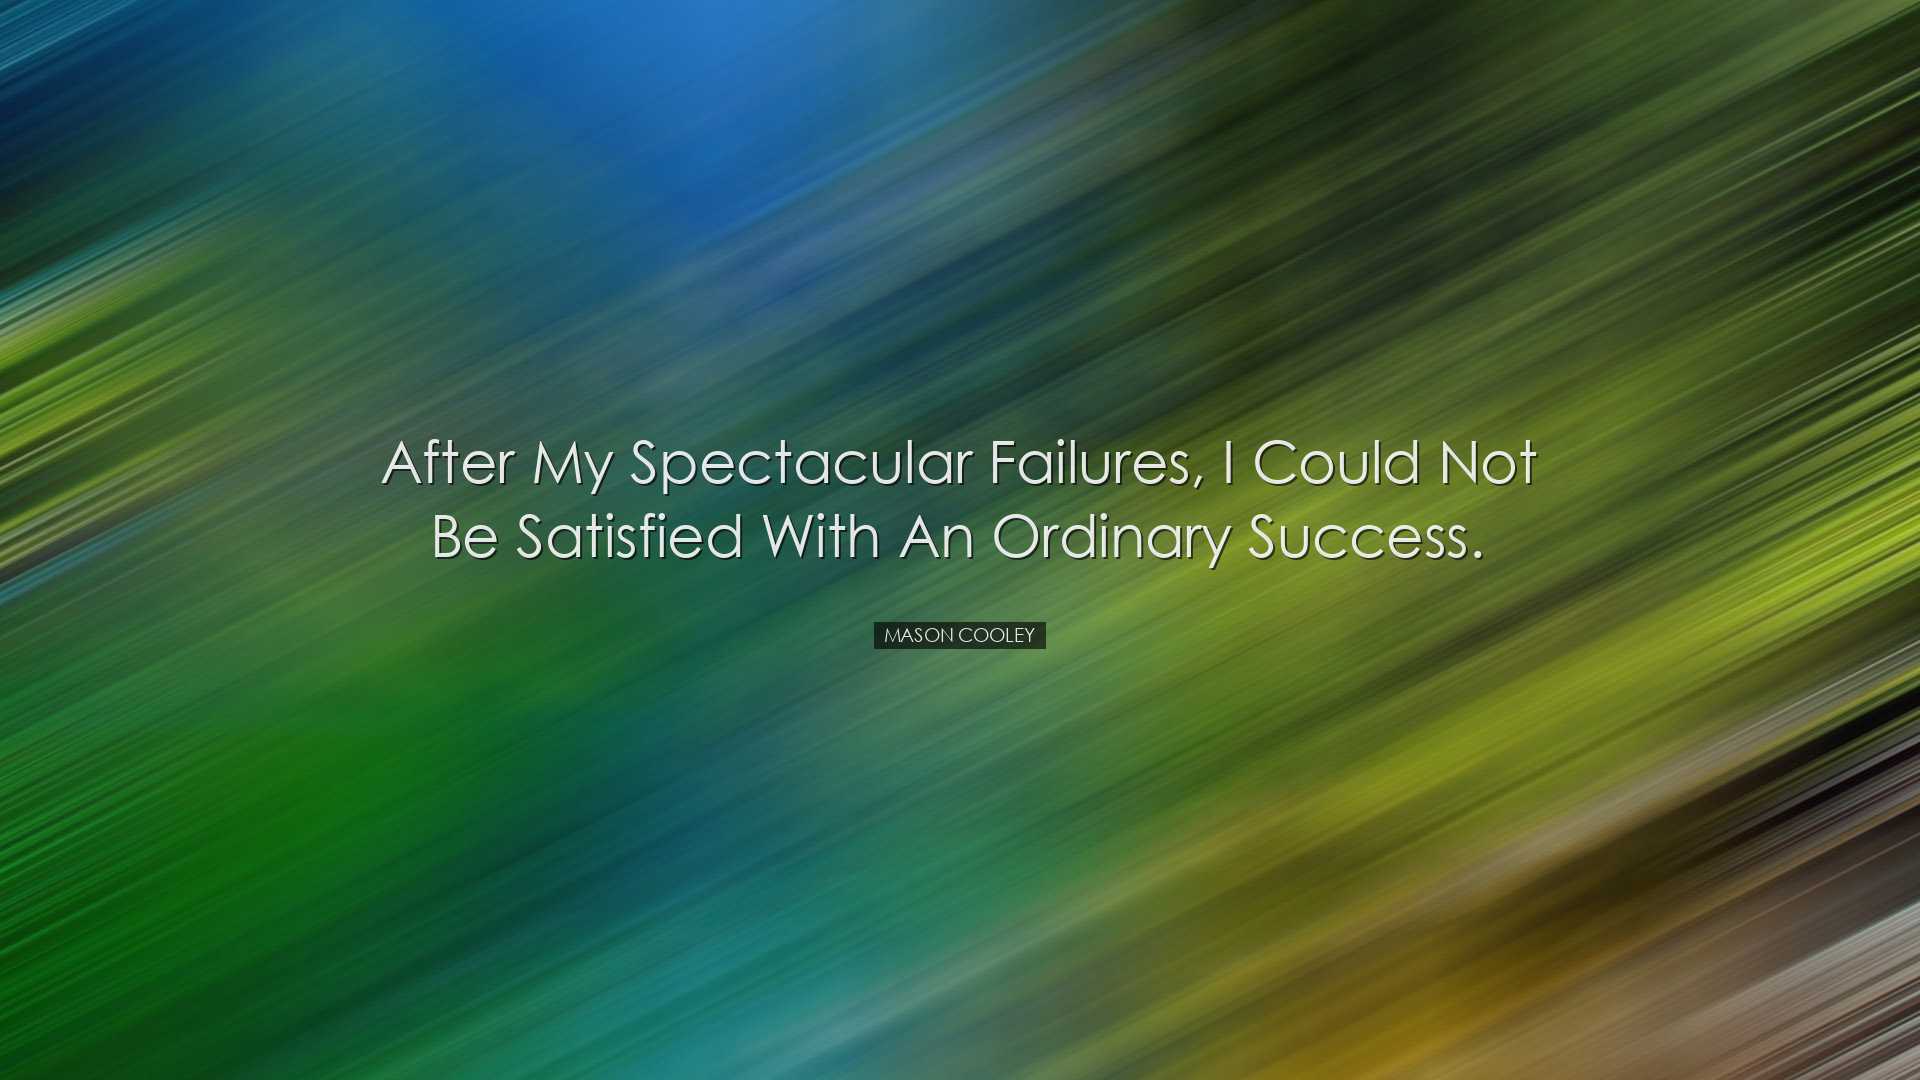 After my spectacular failures, I could not be satisfied with an or